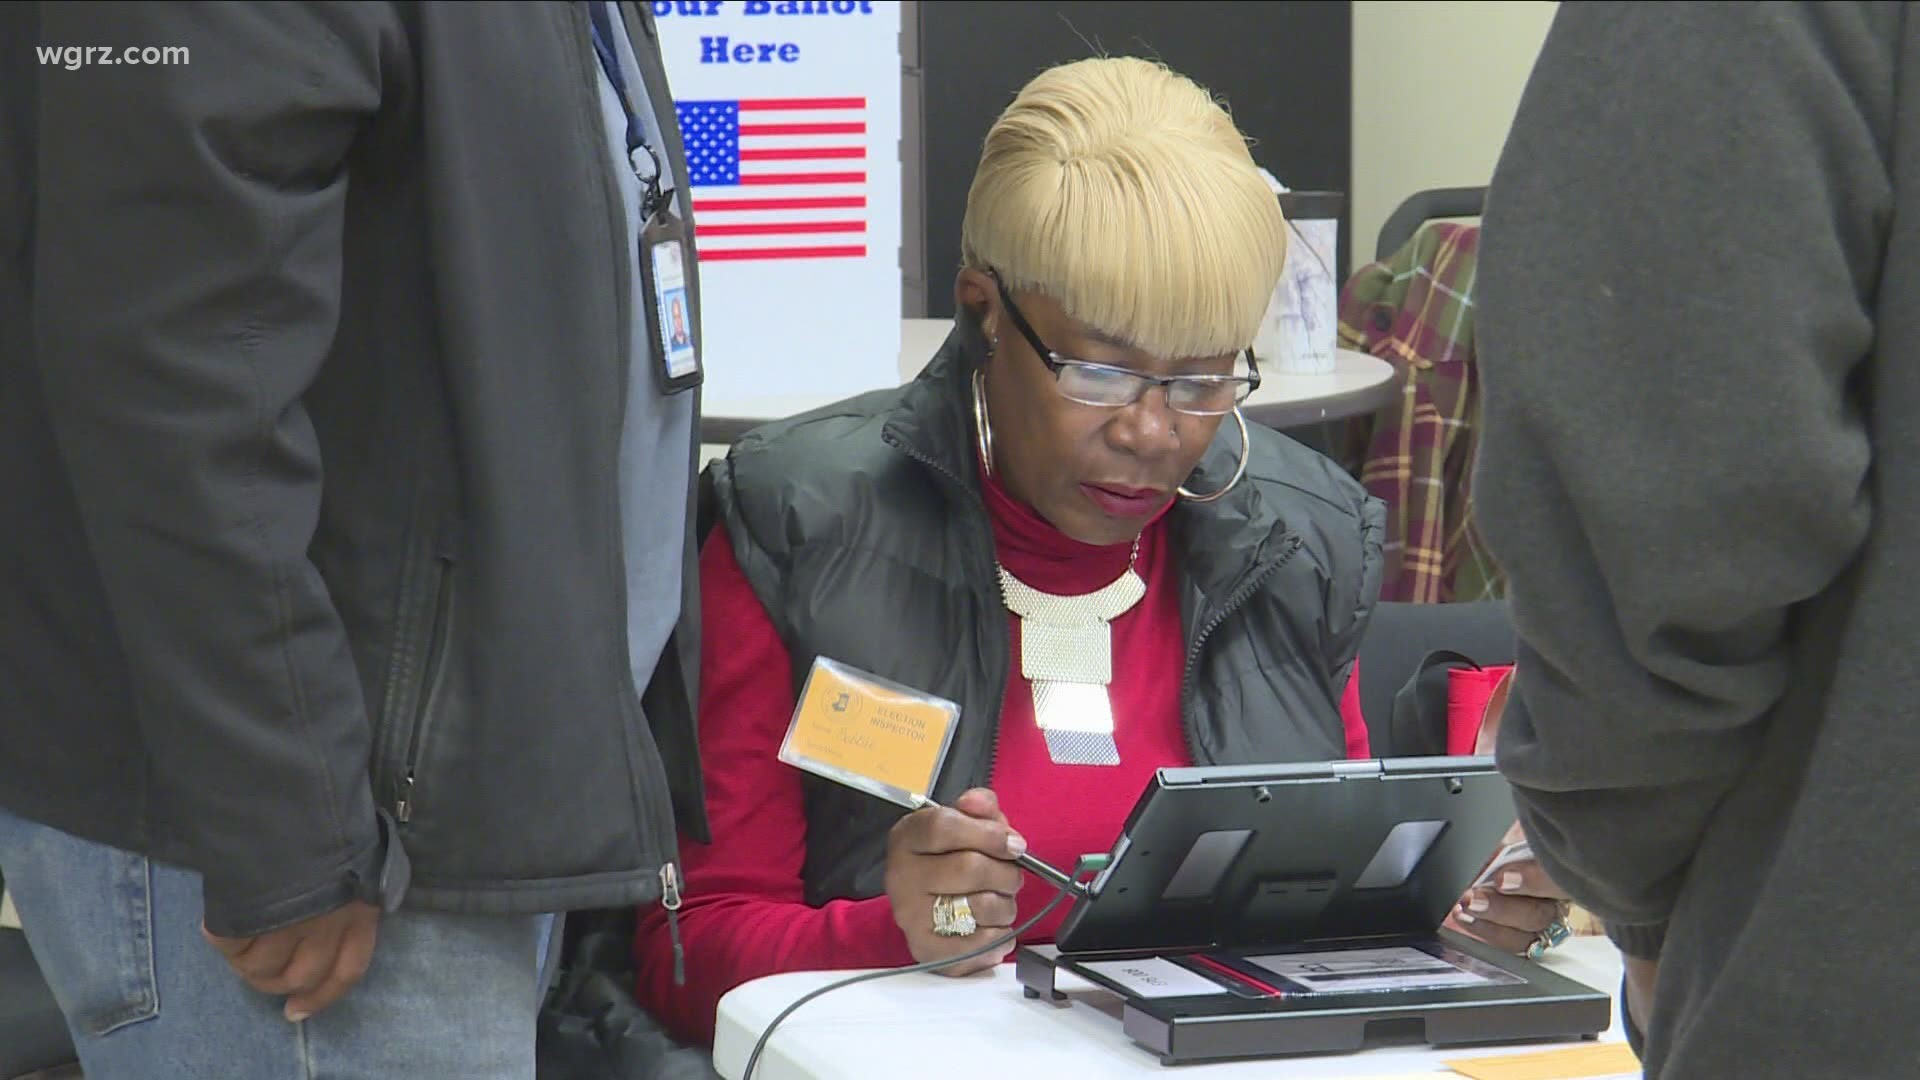 The Erie County Board of Elections has had an estimated 1,500 new applicants.